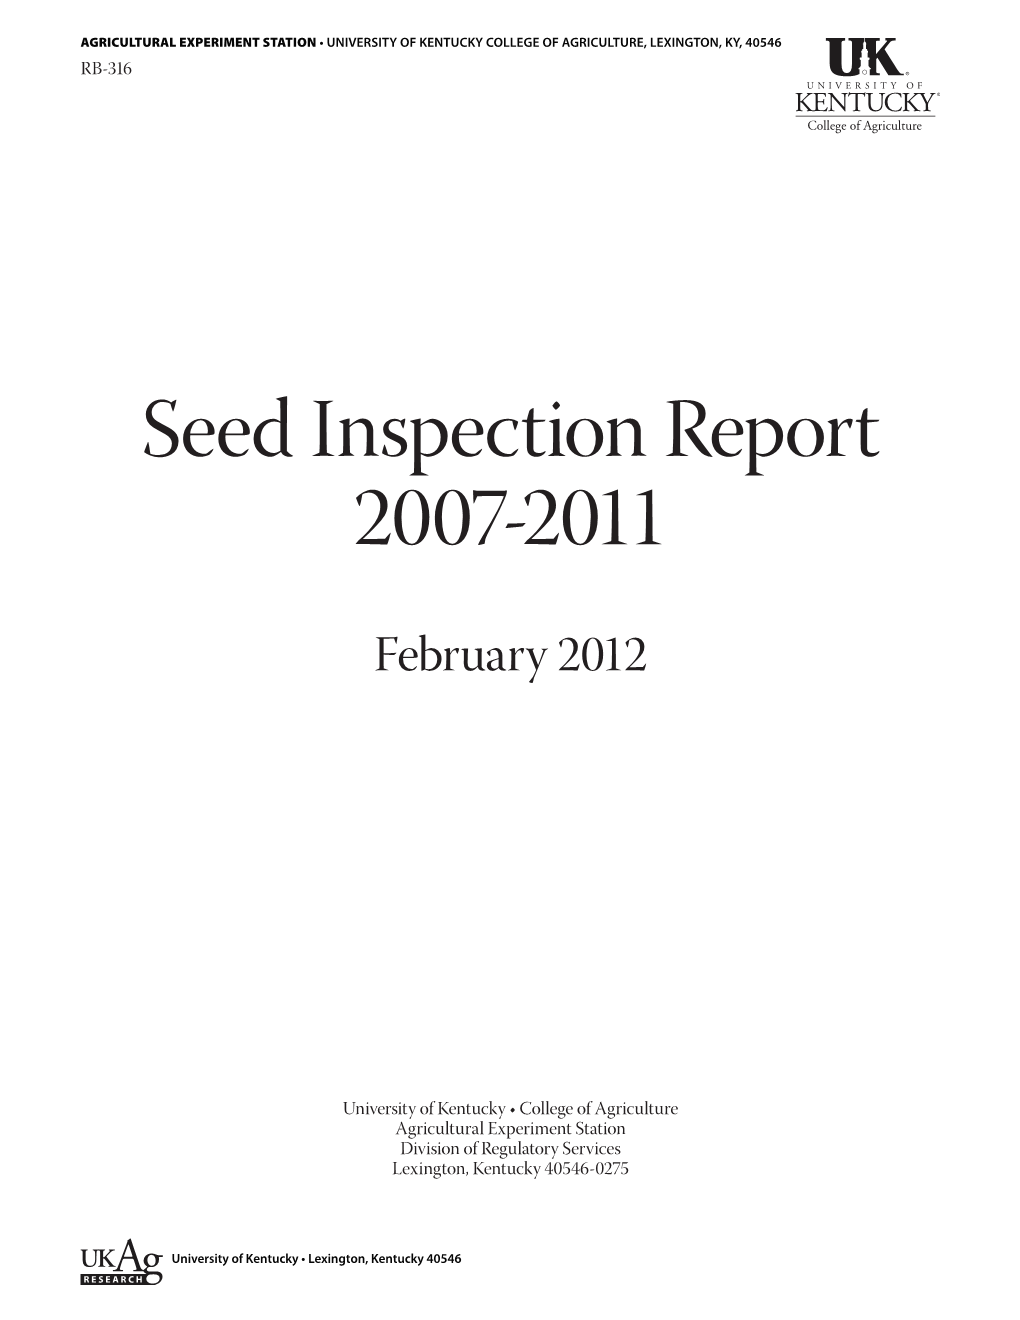 RB-316: Seed Inspection Report 2007-2011